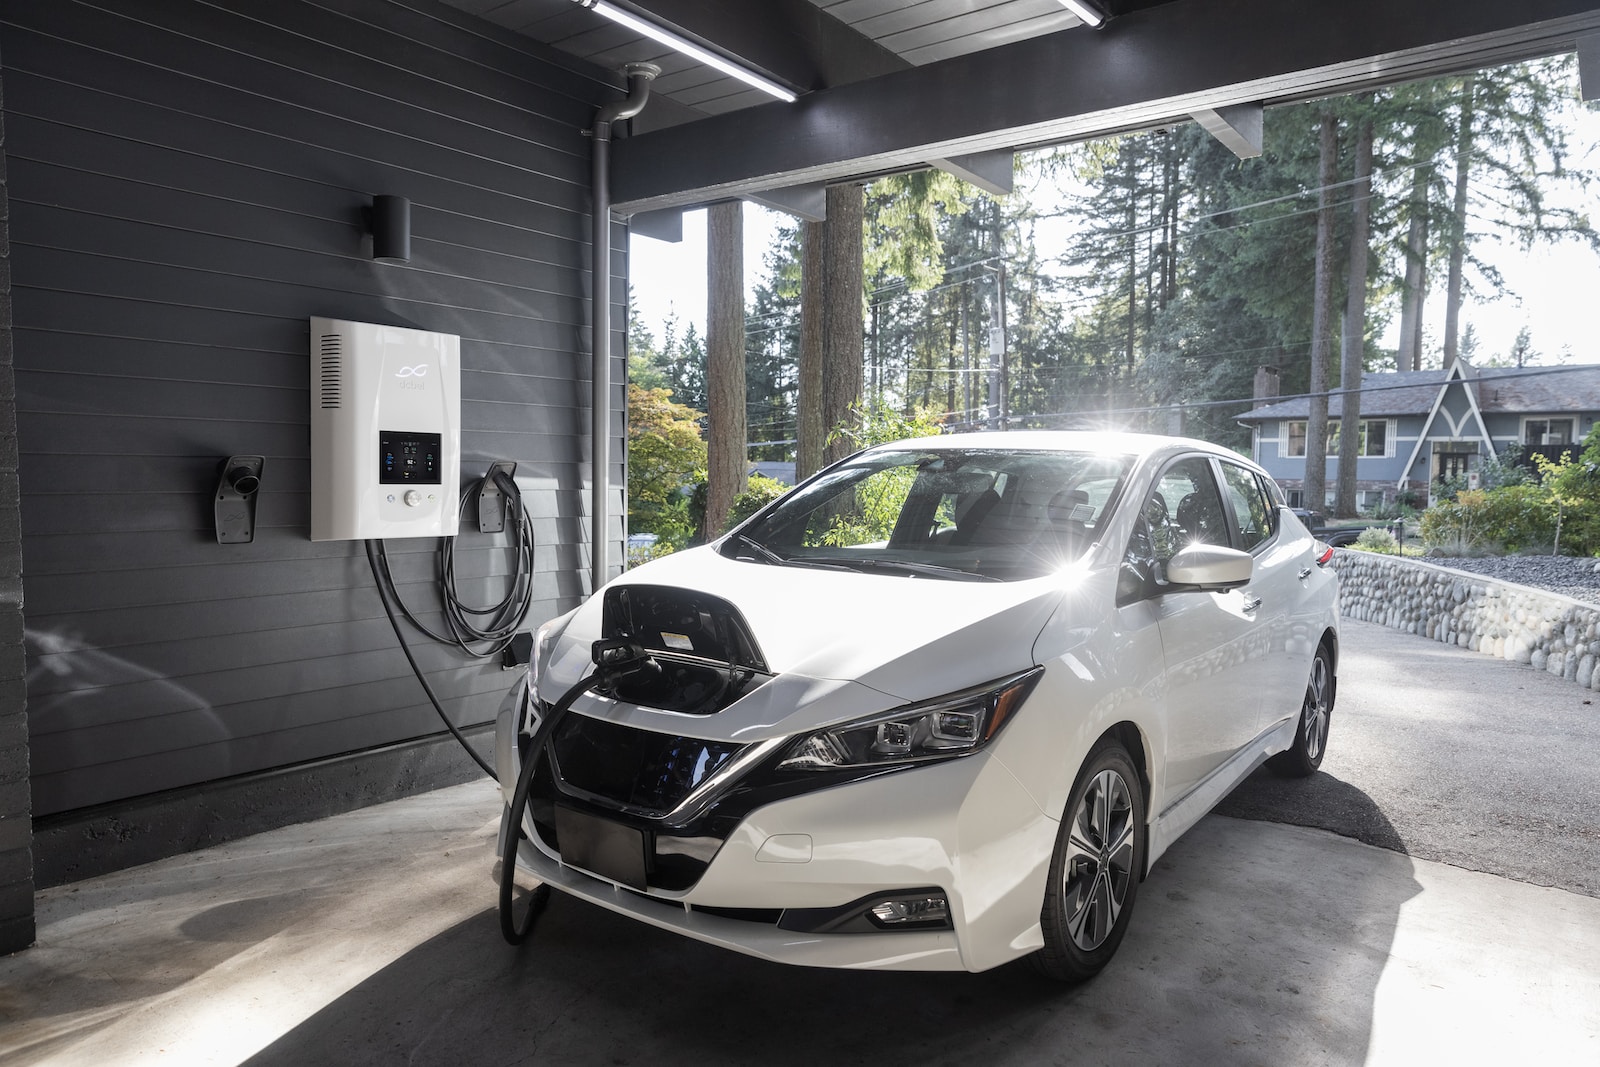 Electric vehicle home charging expenses